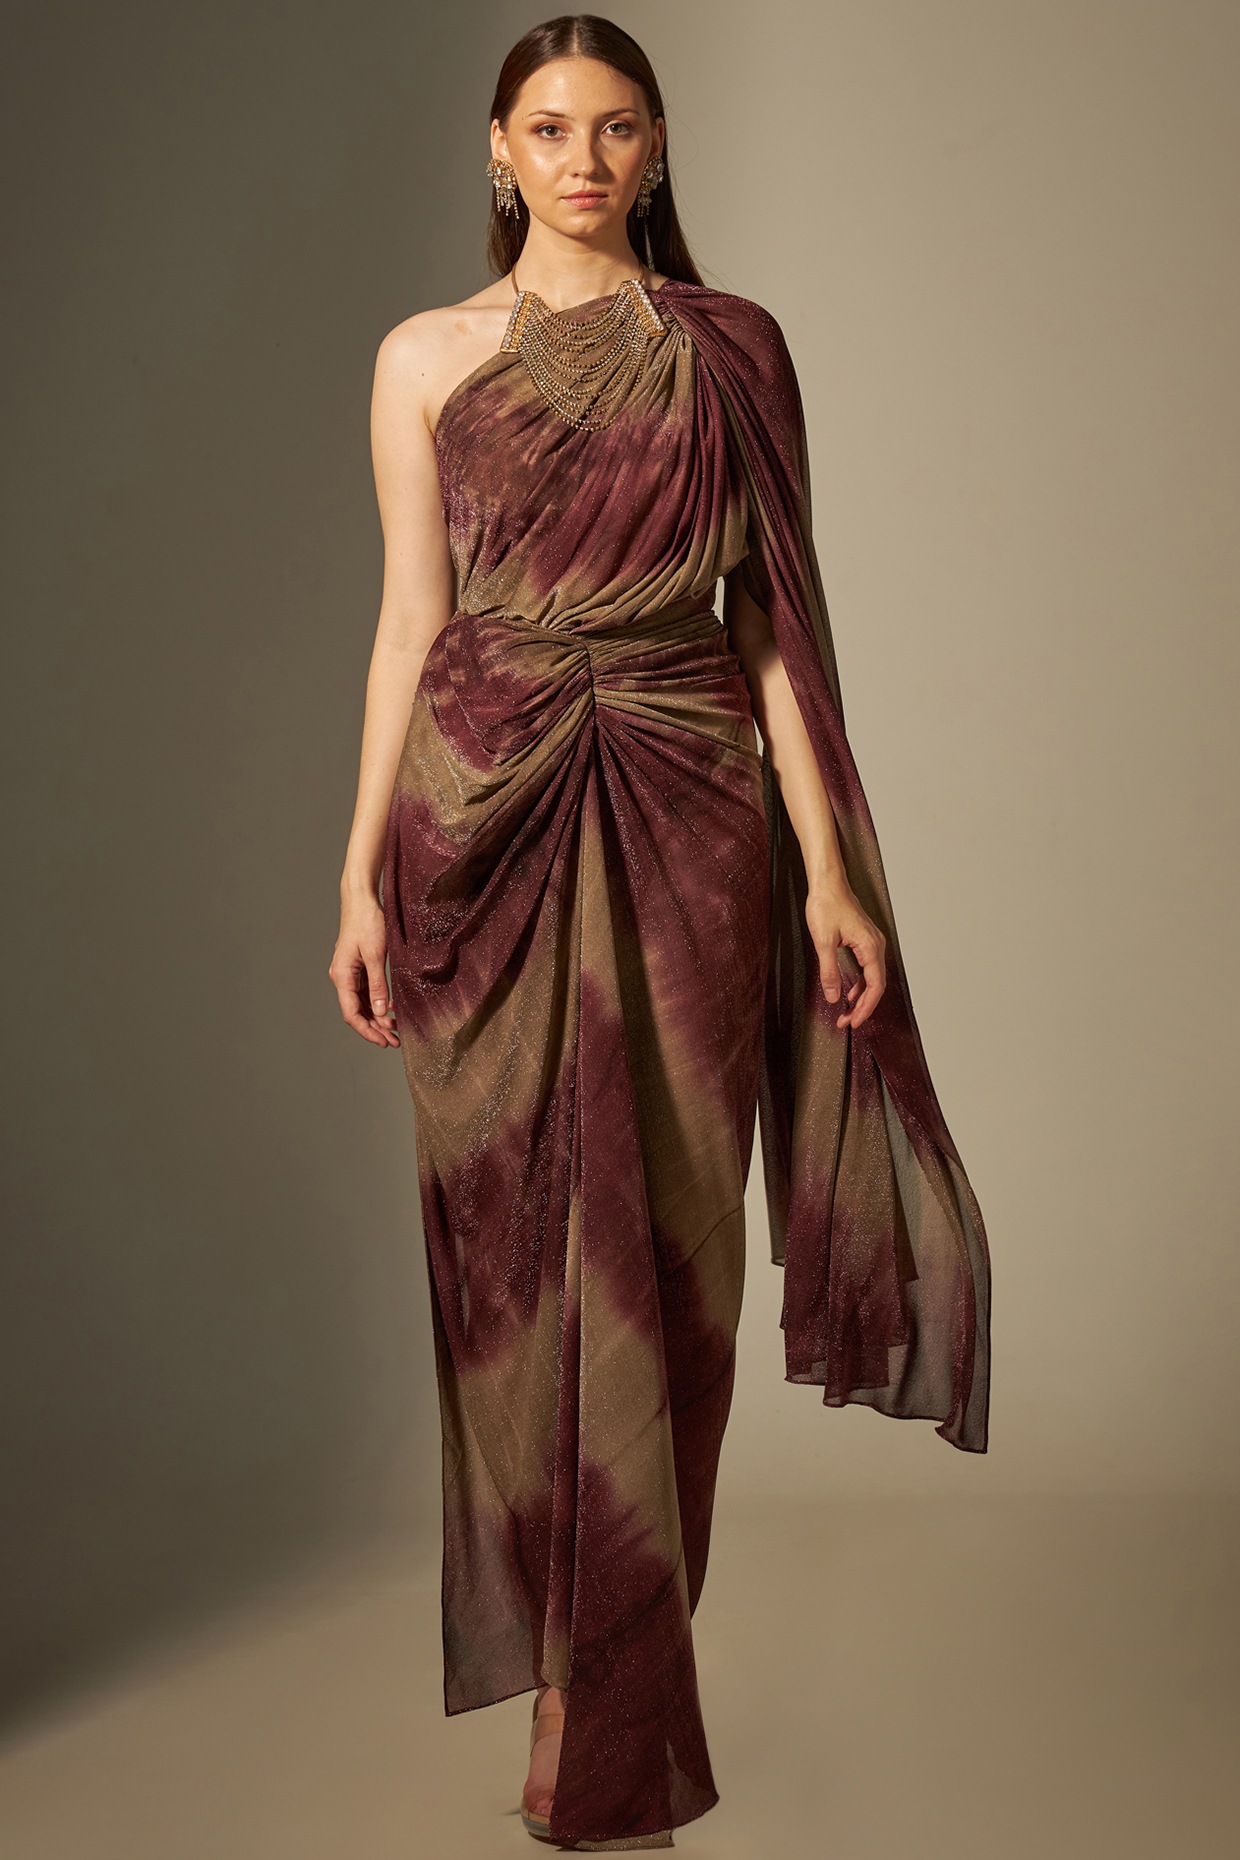 Buy Gray And Maroon Saree Gown Online on Fresh Look Fashion